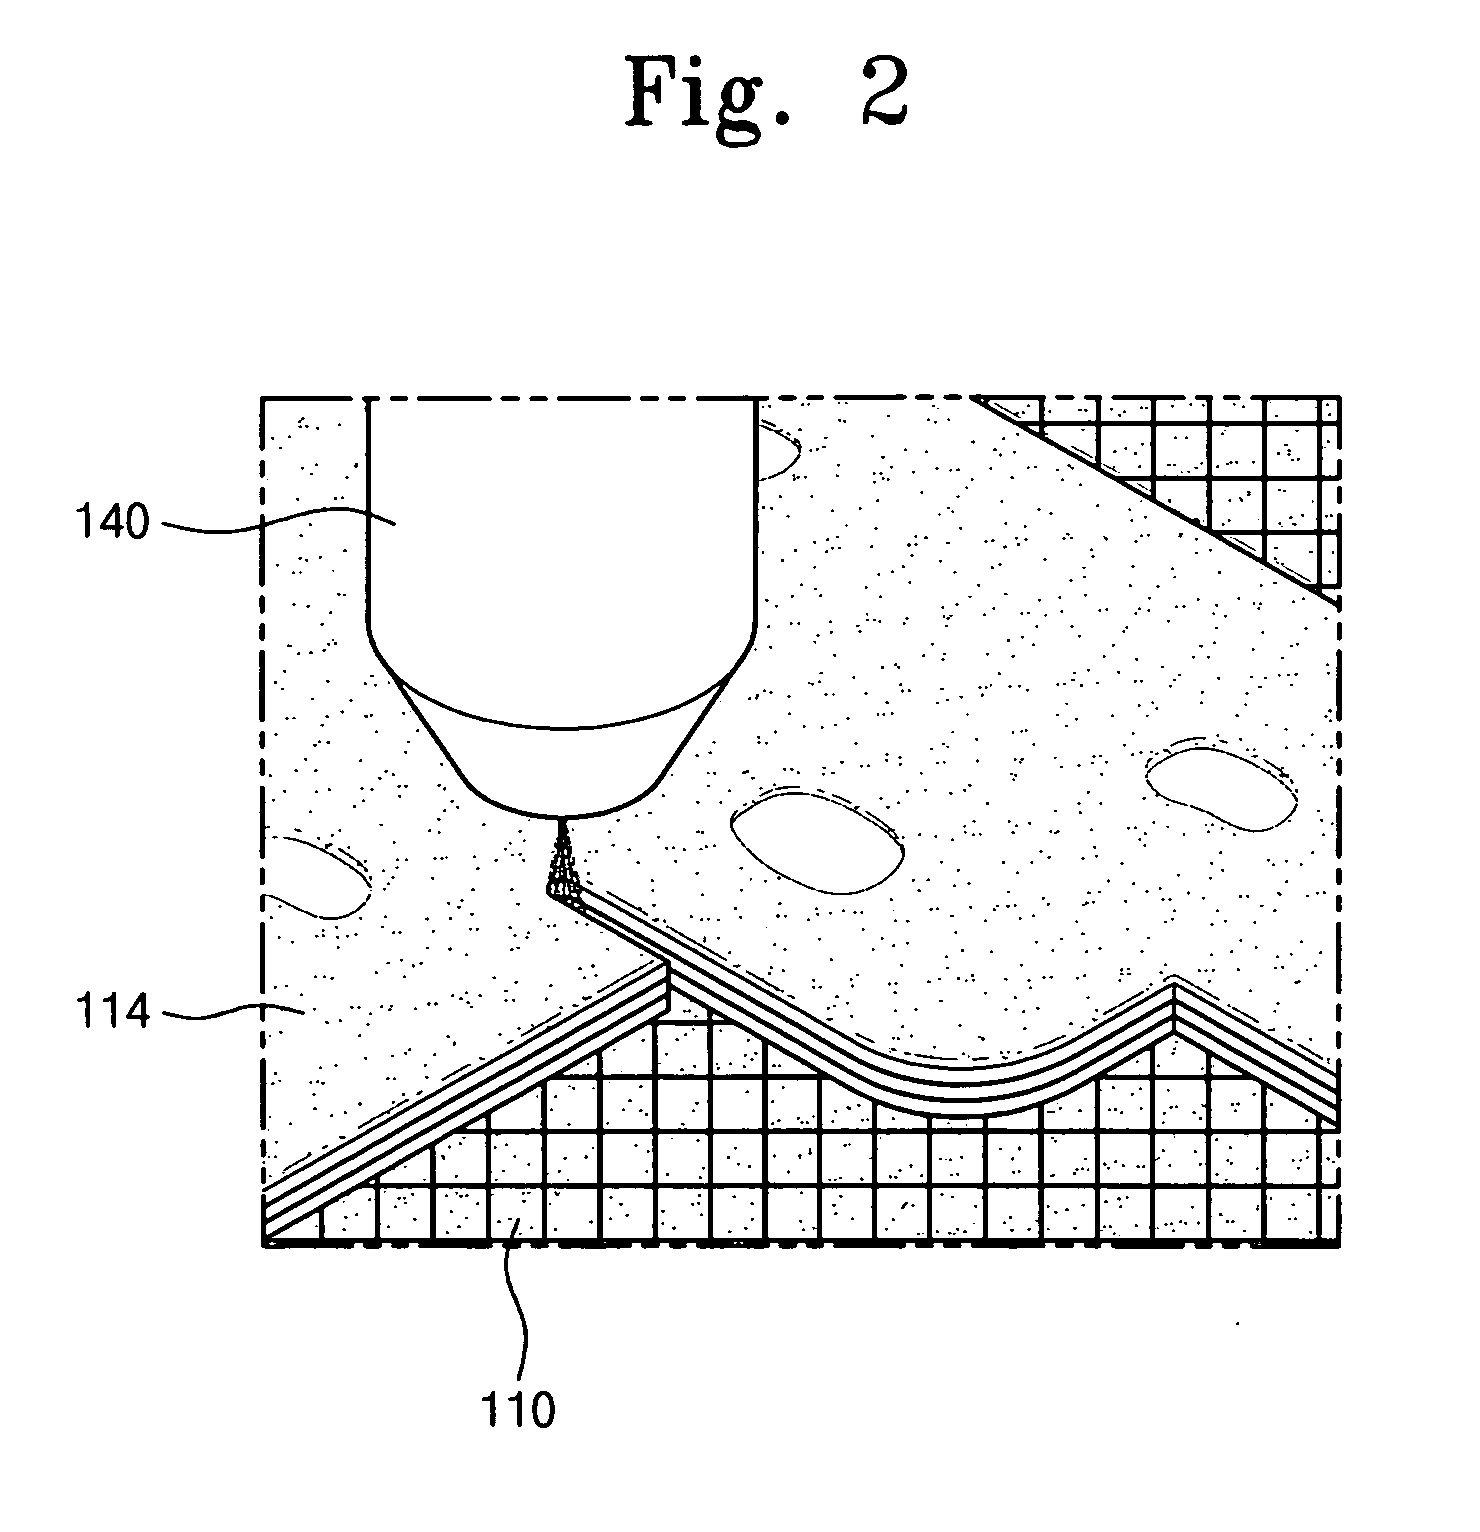 Substrate processing apparatus and method of operating the same